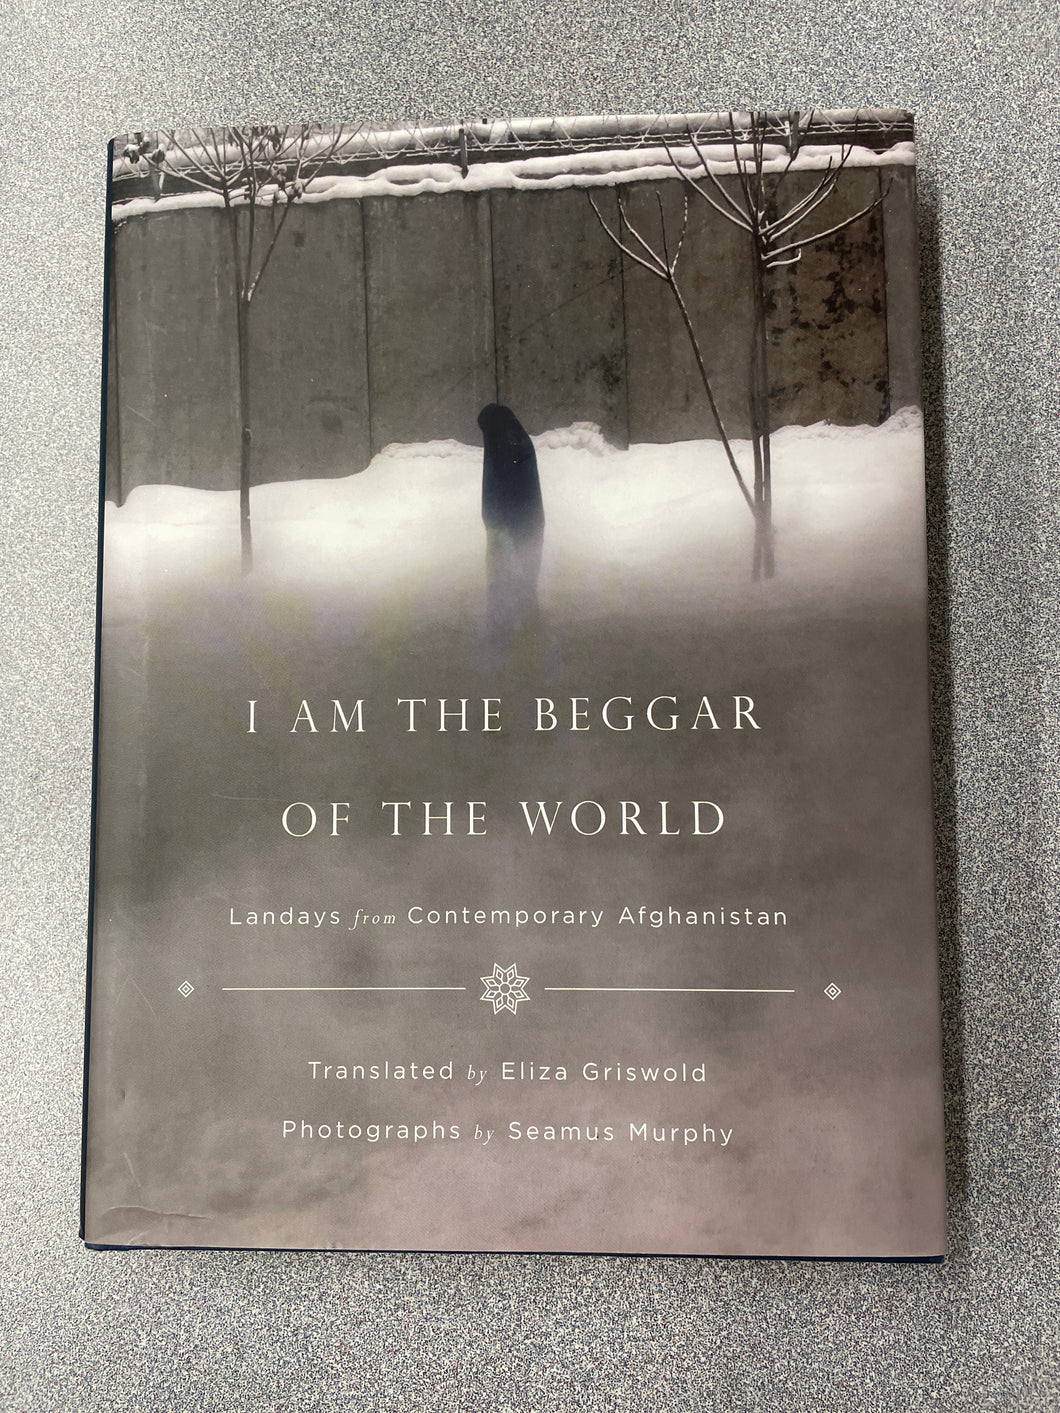 I Am The Beggar Of The World: Landays from Contemporary Afghanistan, Griswold, Eliza, ed, [2014] P 4/24